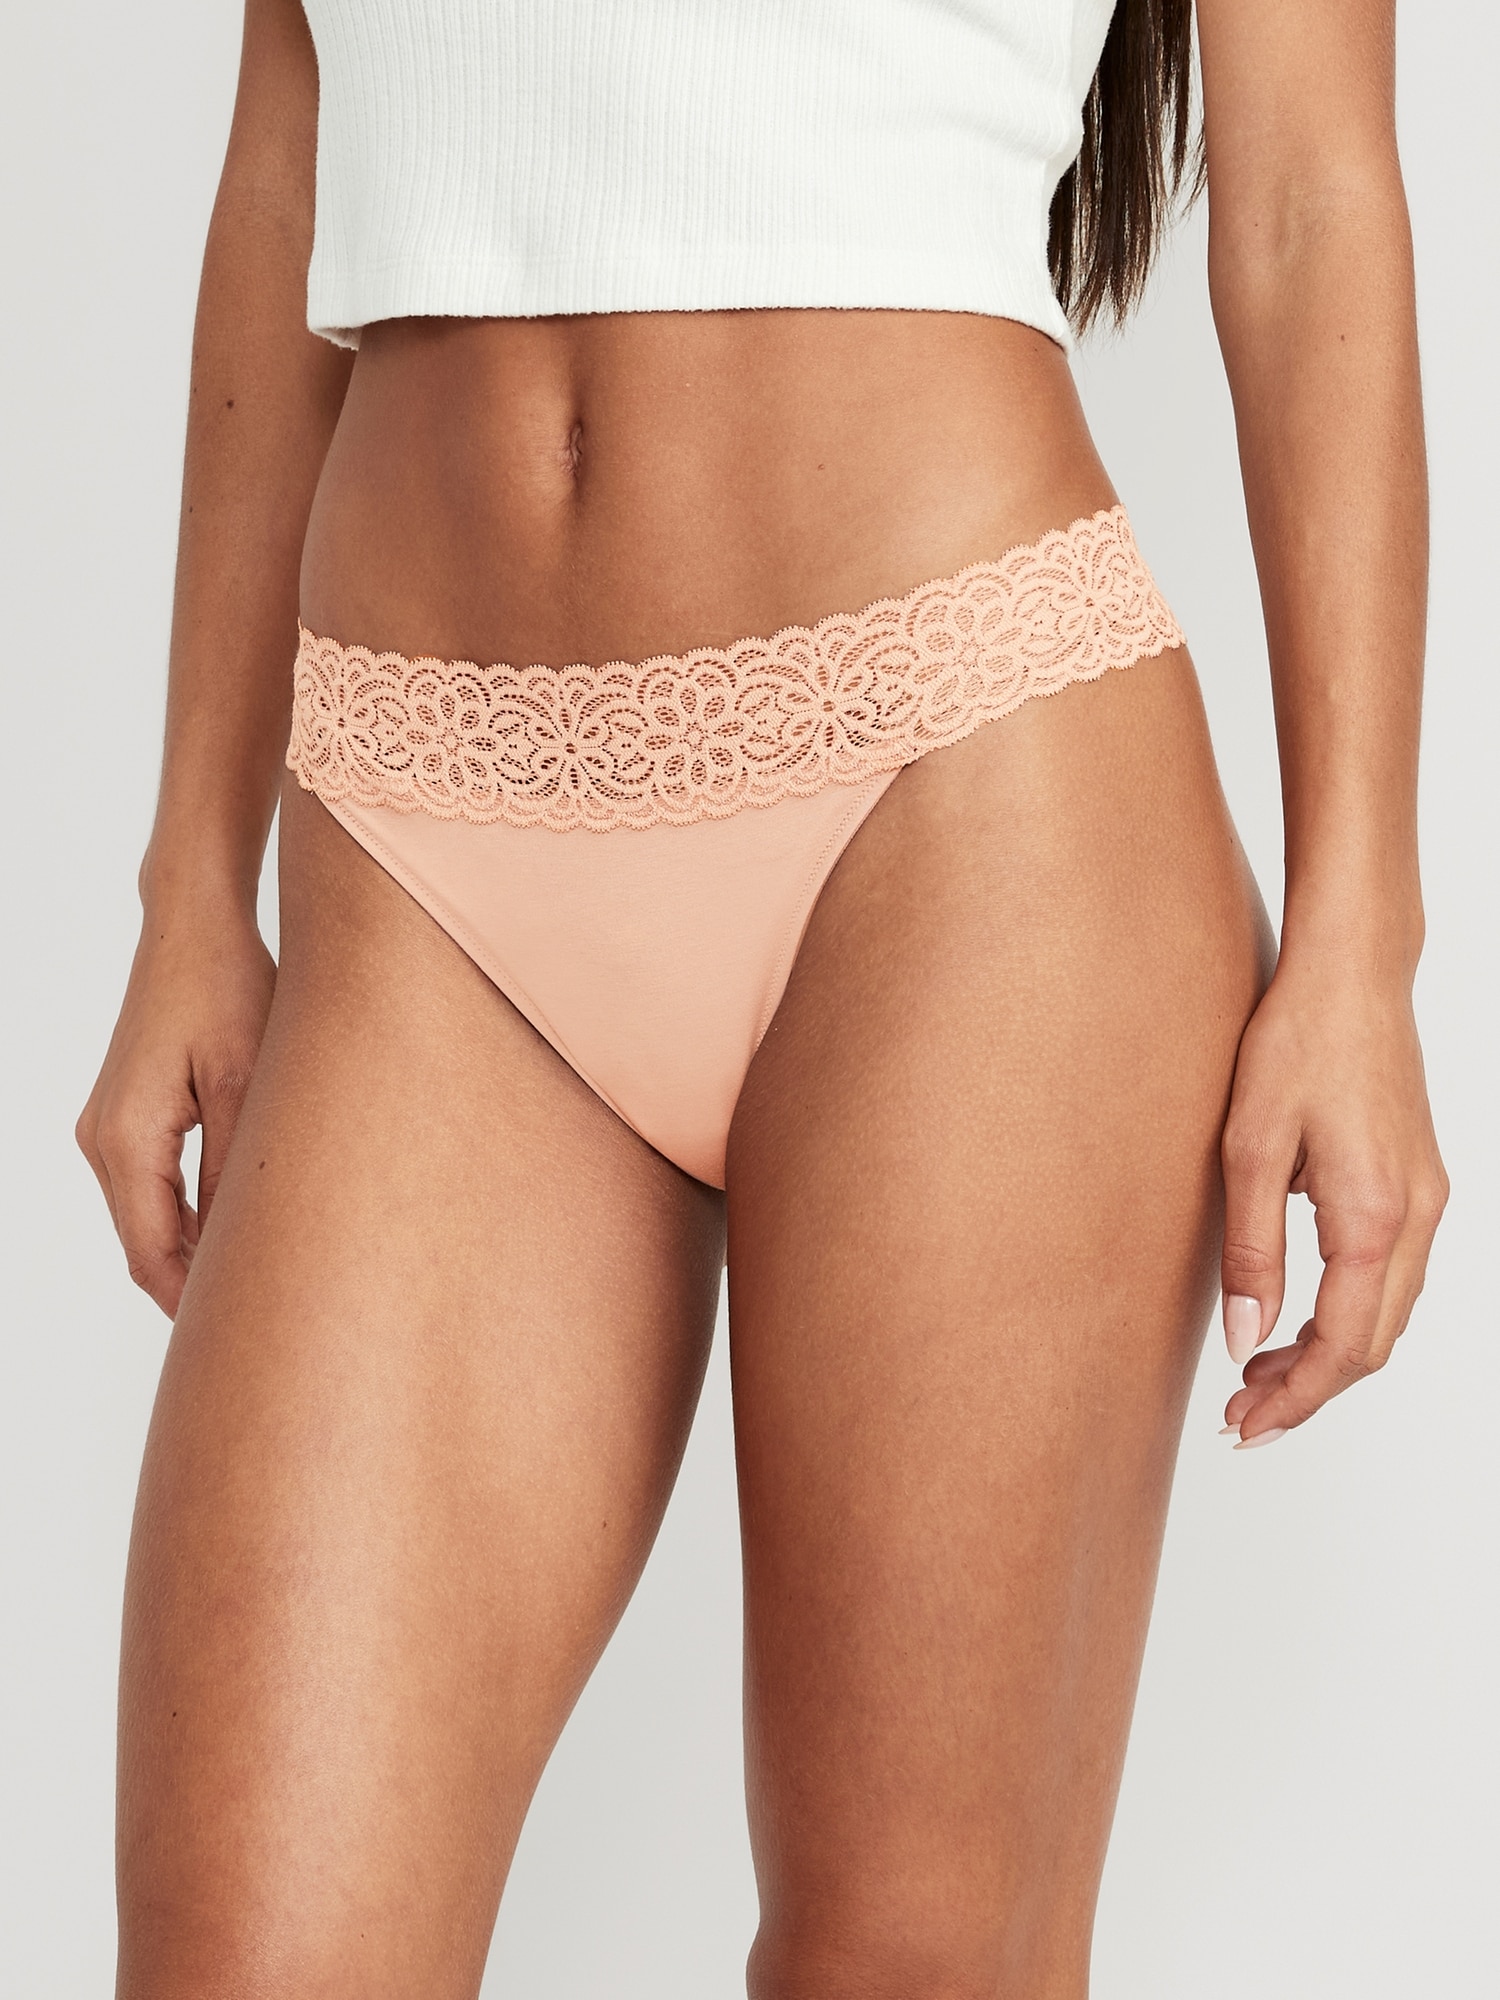 Victoria's Secret - Whether you love lace-trim, cotton, thongs, or